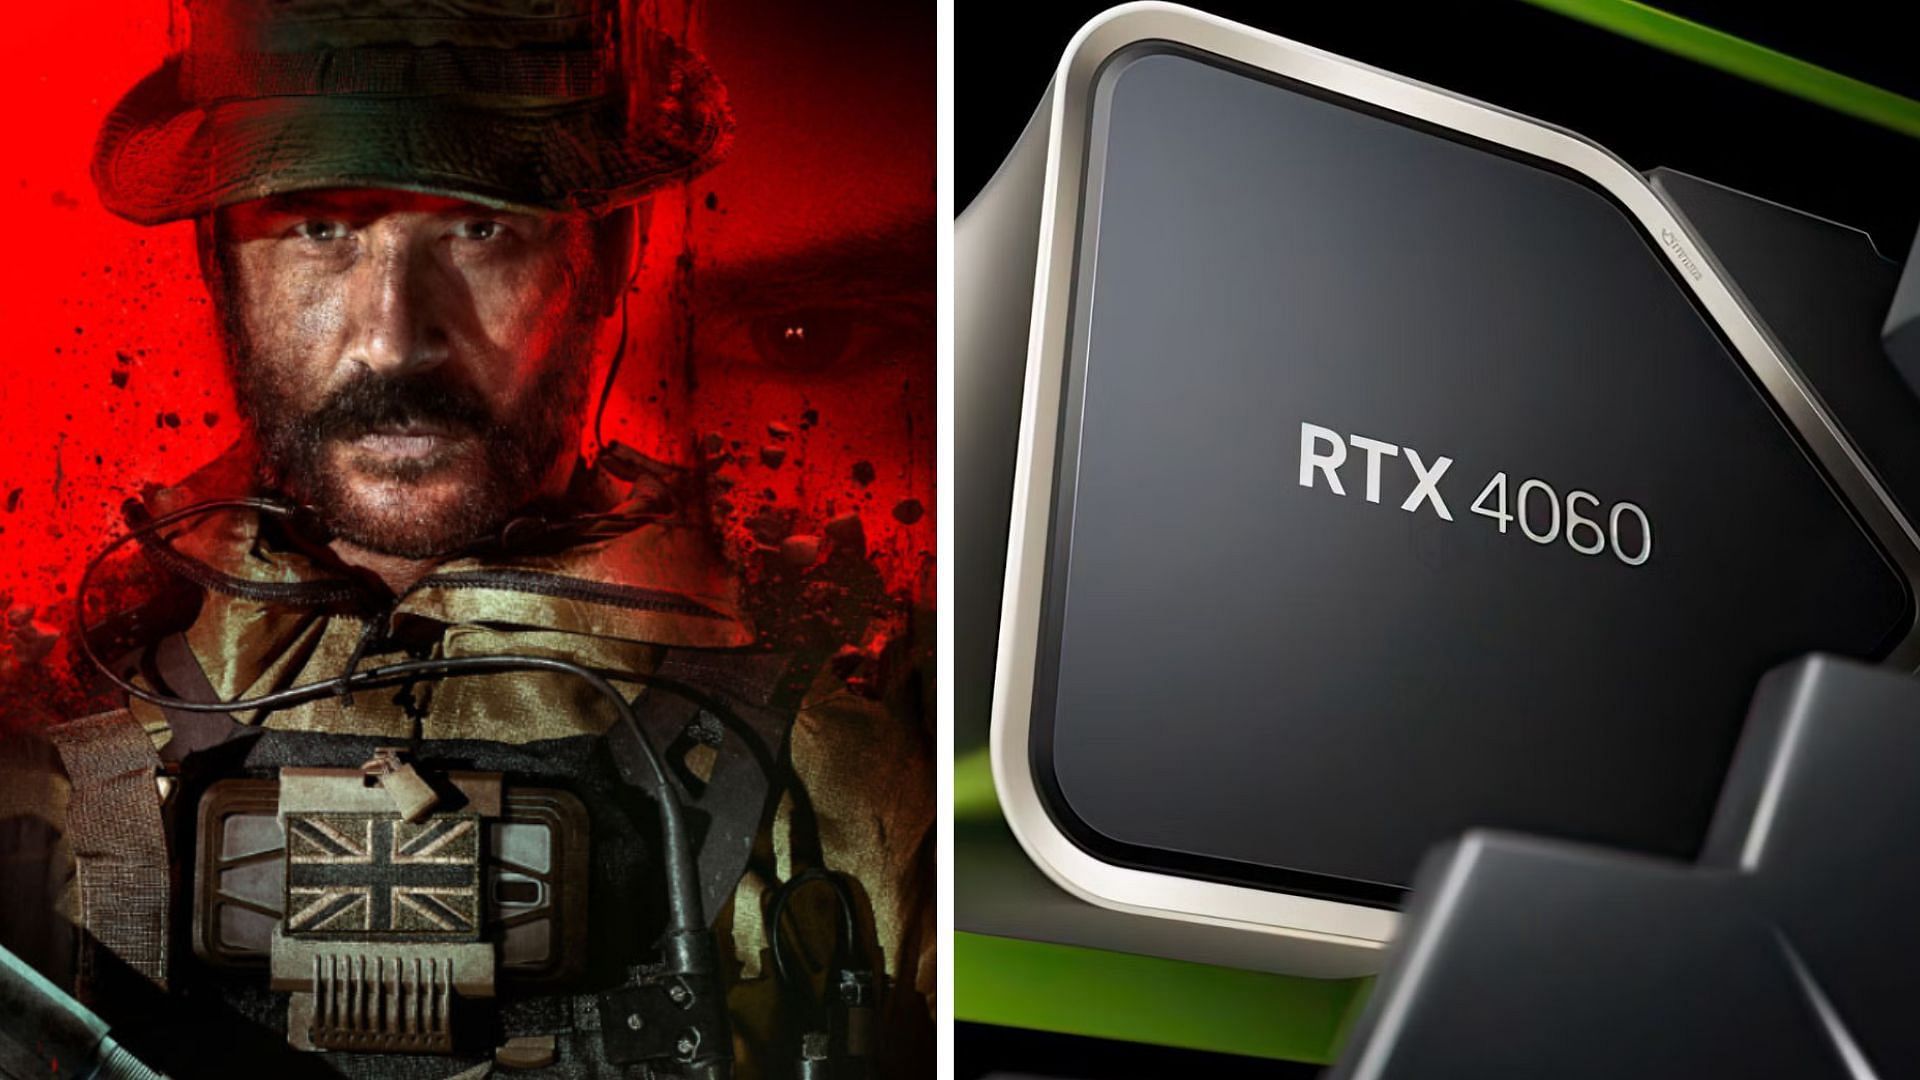 The Nvidia RTX 4060 can play Modern Warfare 3 with some tweaks (Image via Nvidia and Activision)